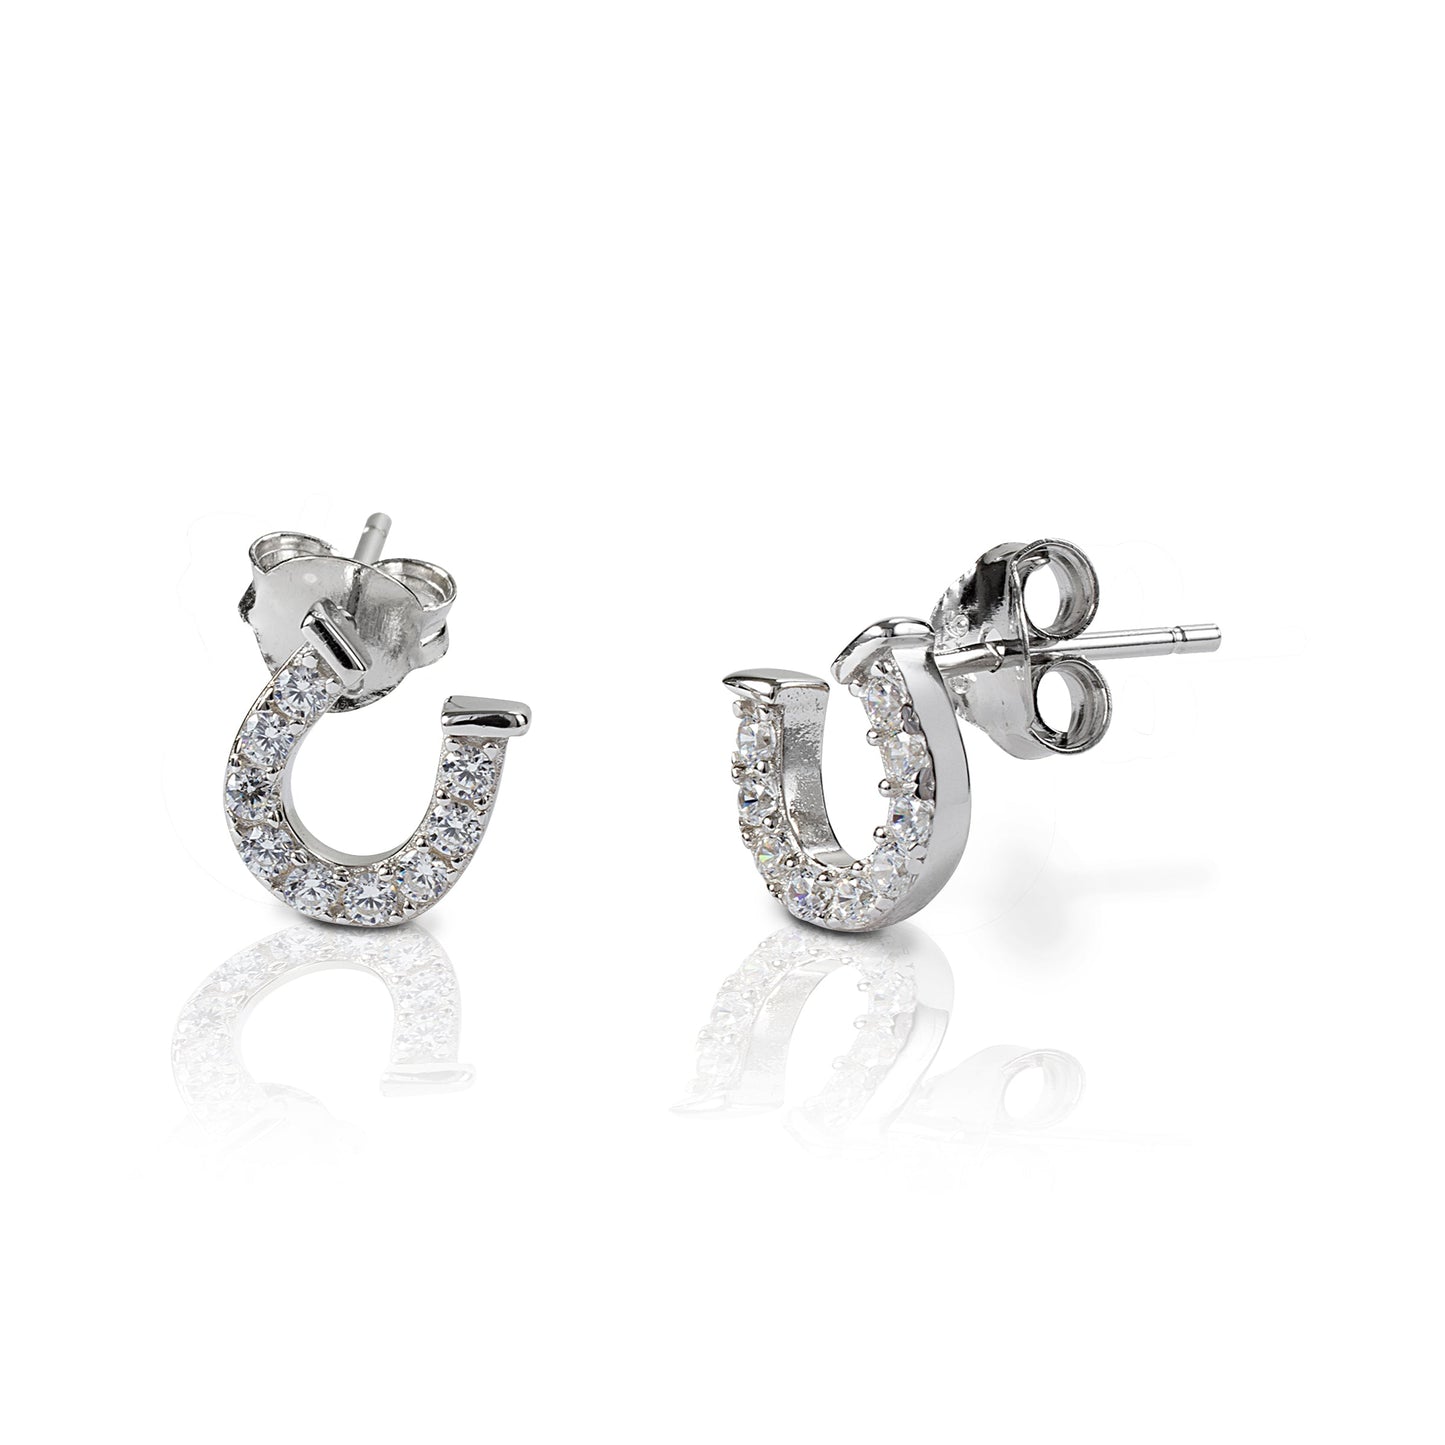 Kelly Herd branded horseshoe-shaped stud earrings with crystals.